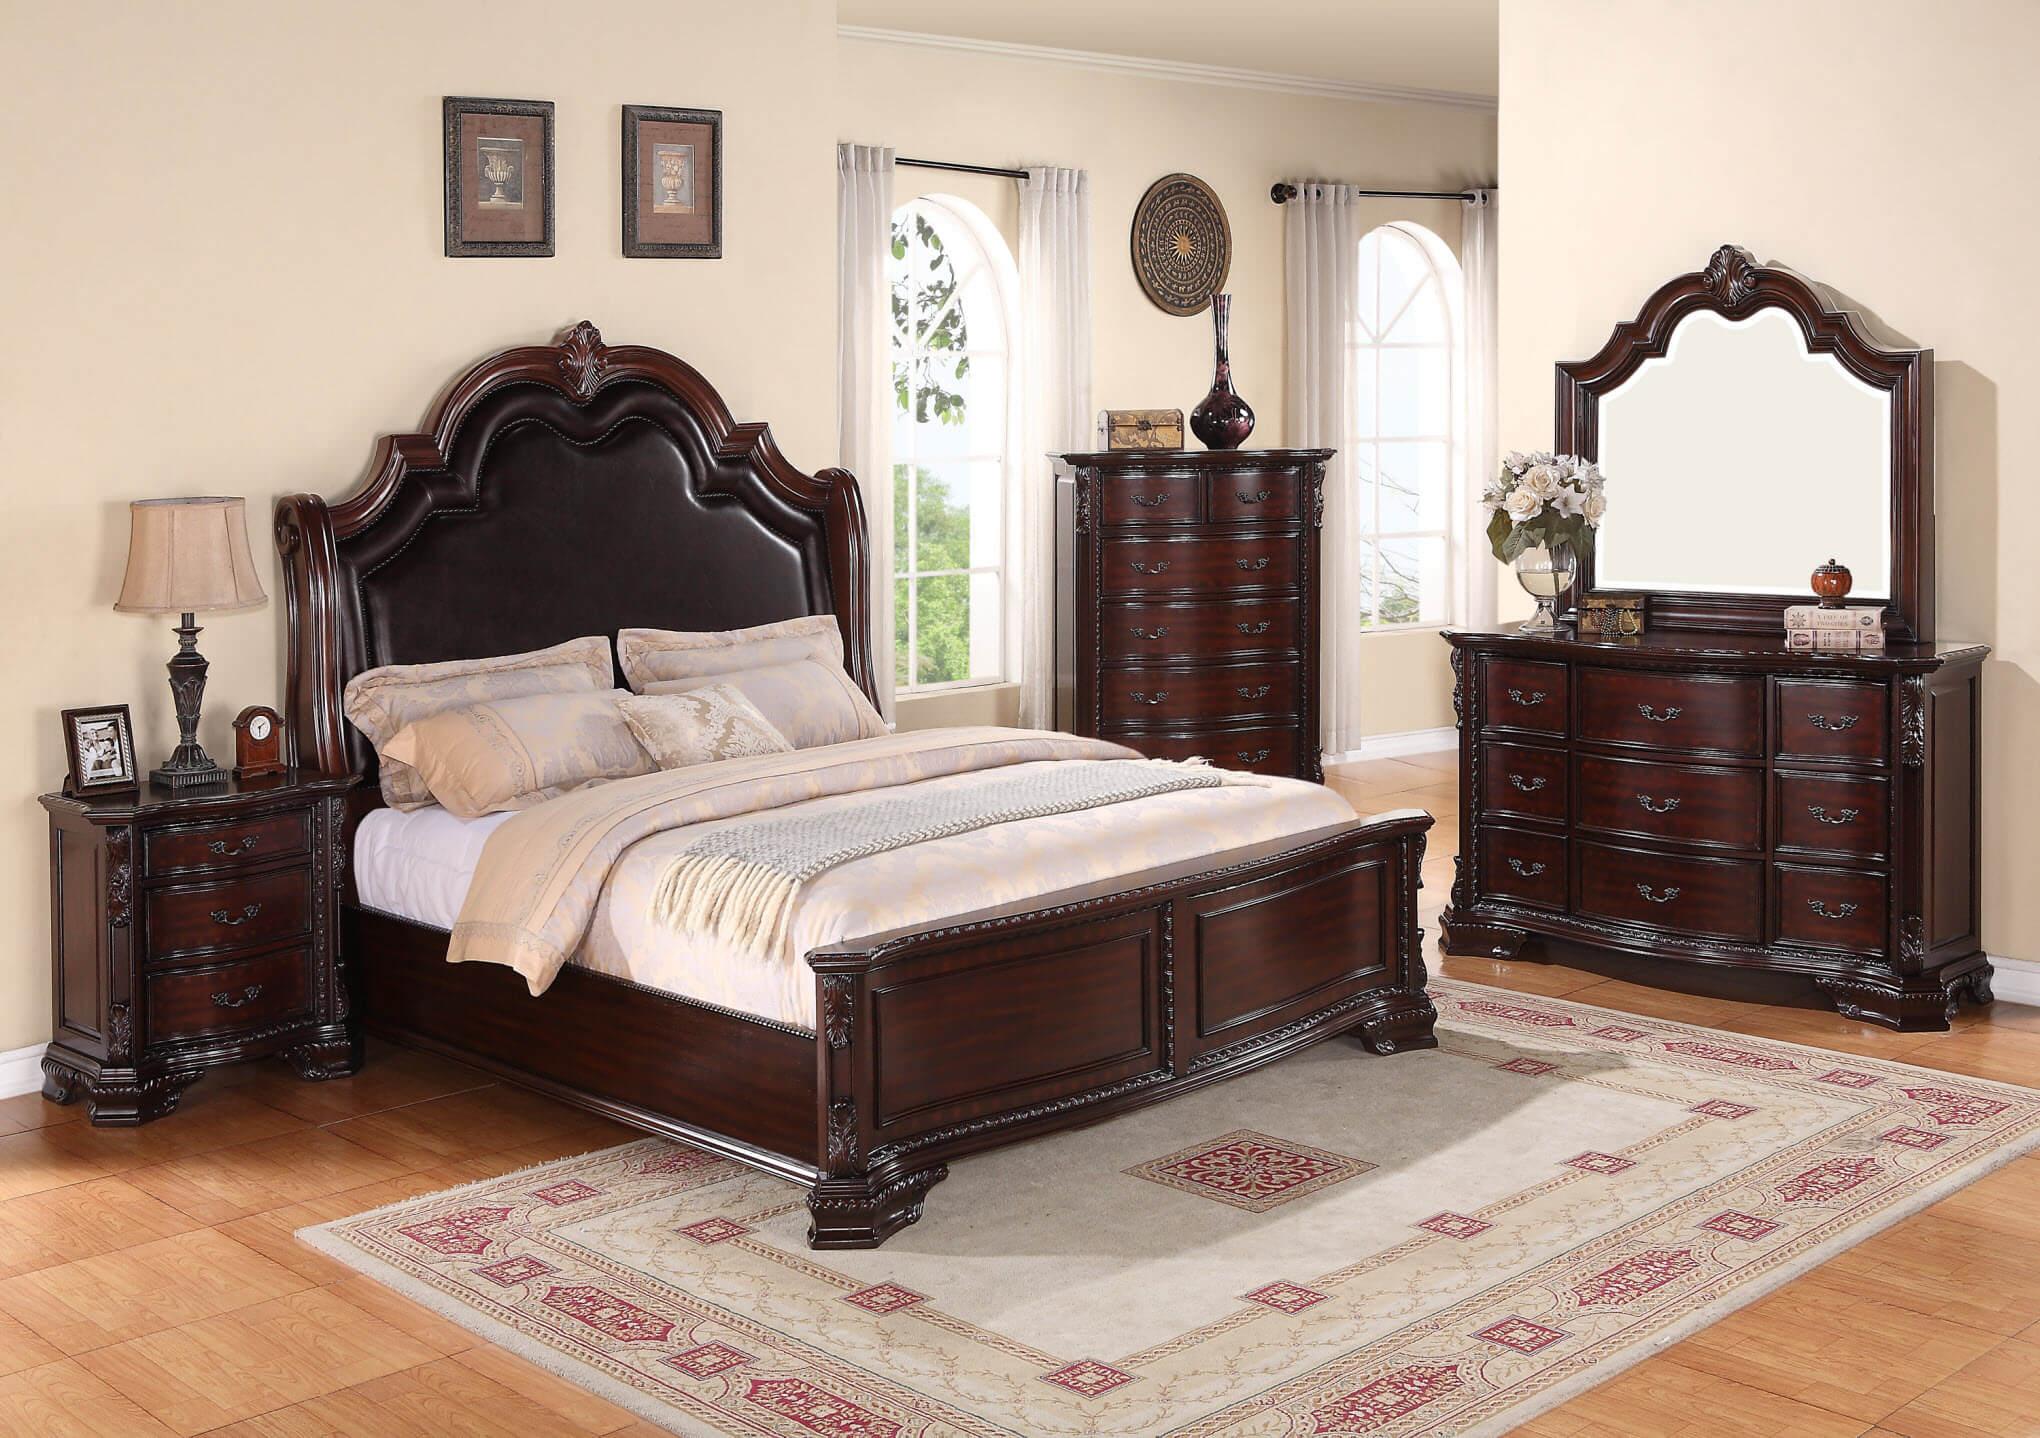 

    
Brown Panel Bedroom Set by Crown Mark Sheffield B1100-Q-Bed-6pcs
